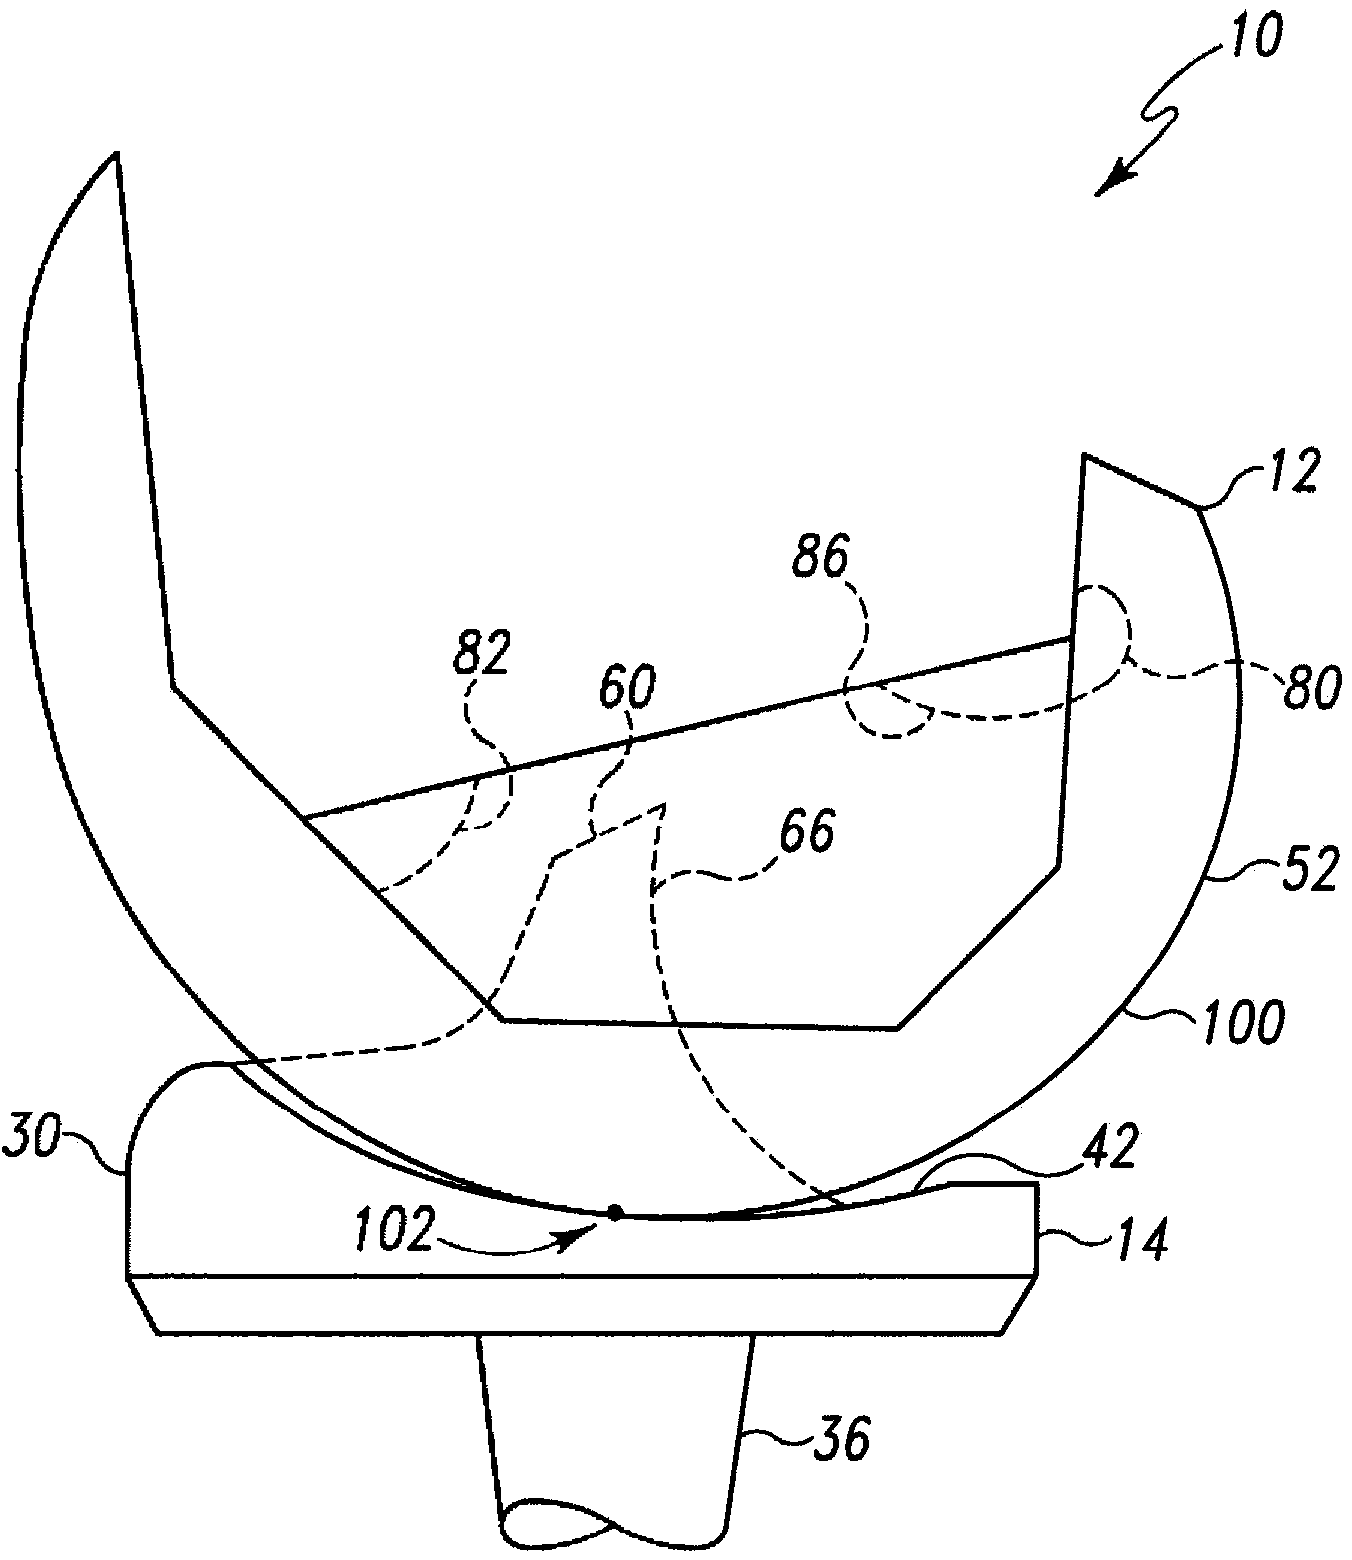 Posterior stabilized orthopaedic knee prosthesis having controlled condylar curvature